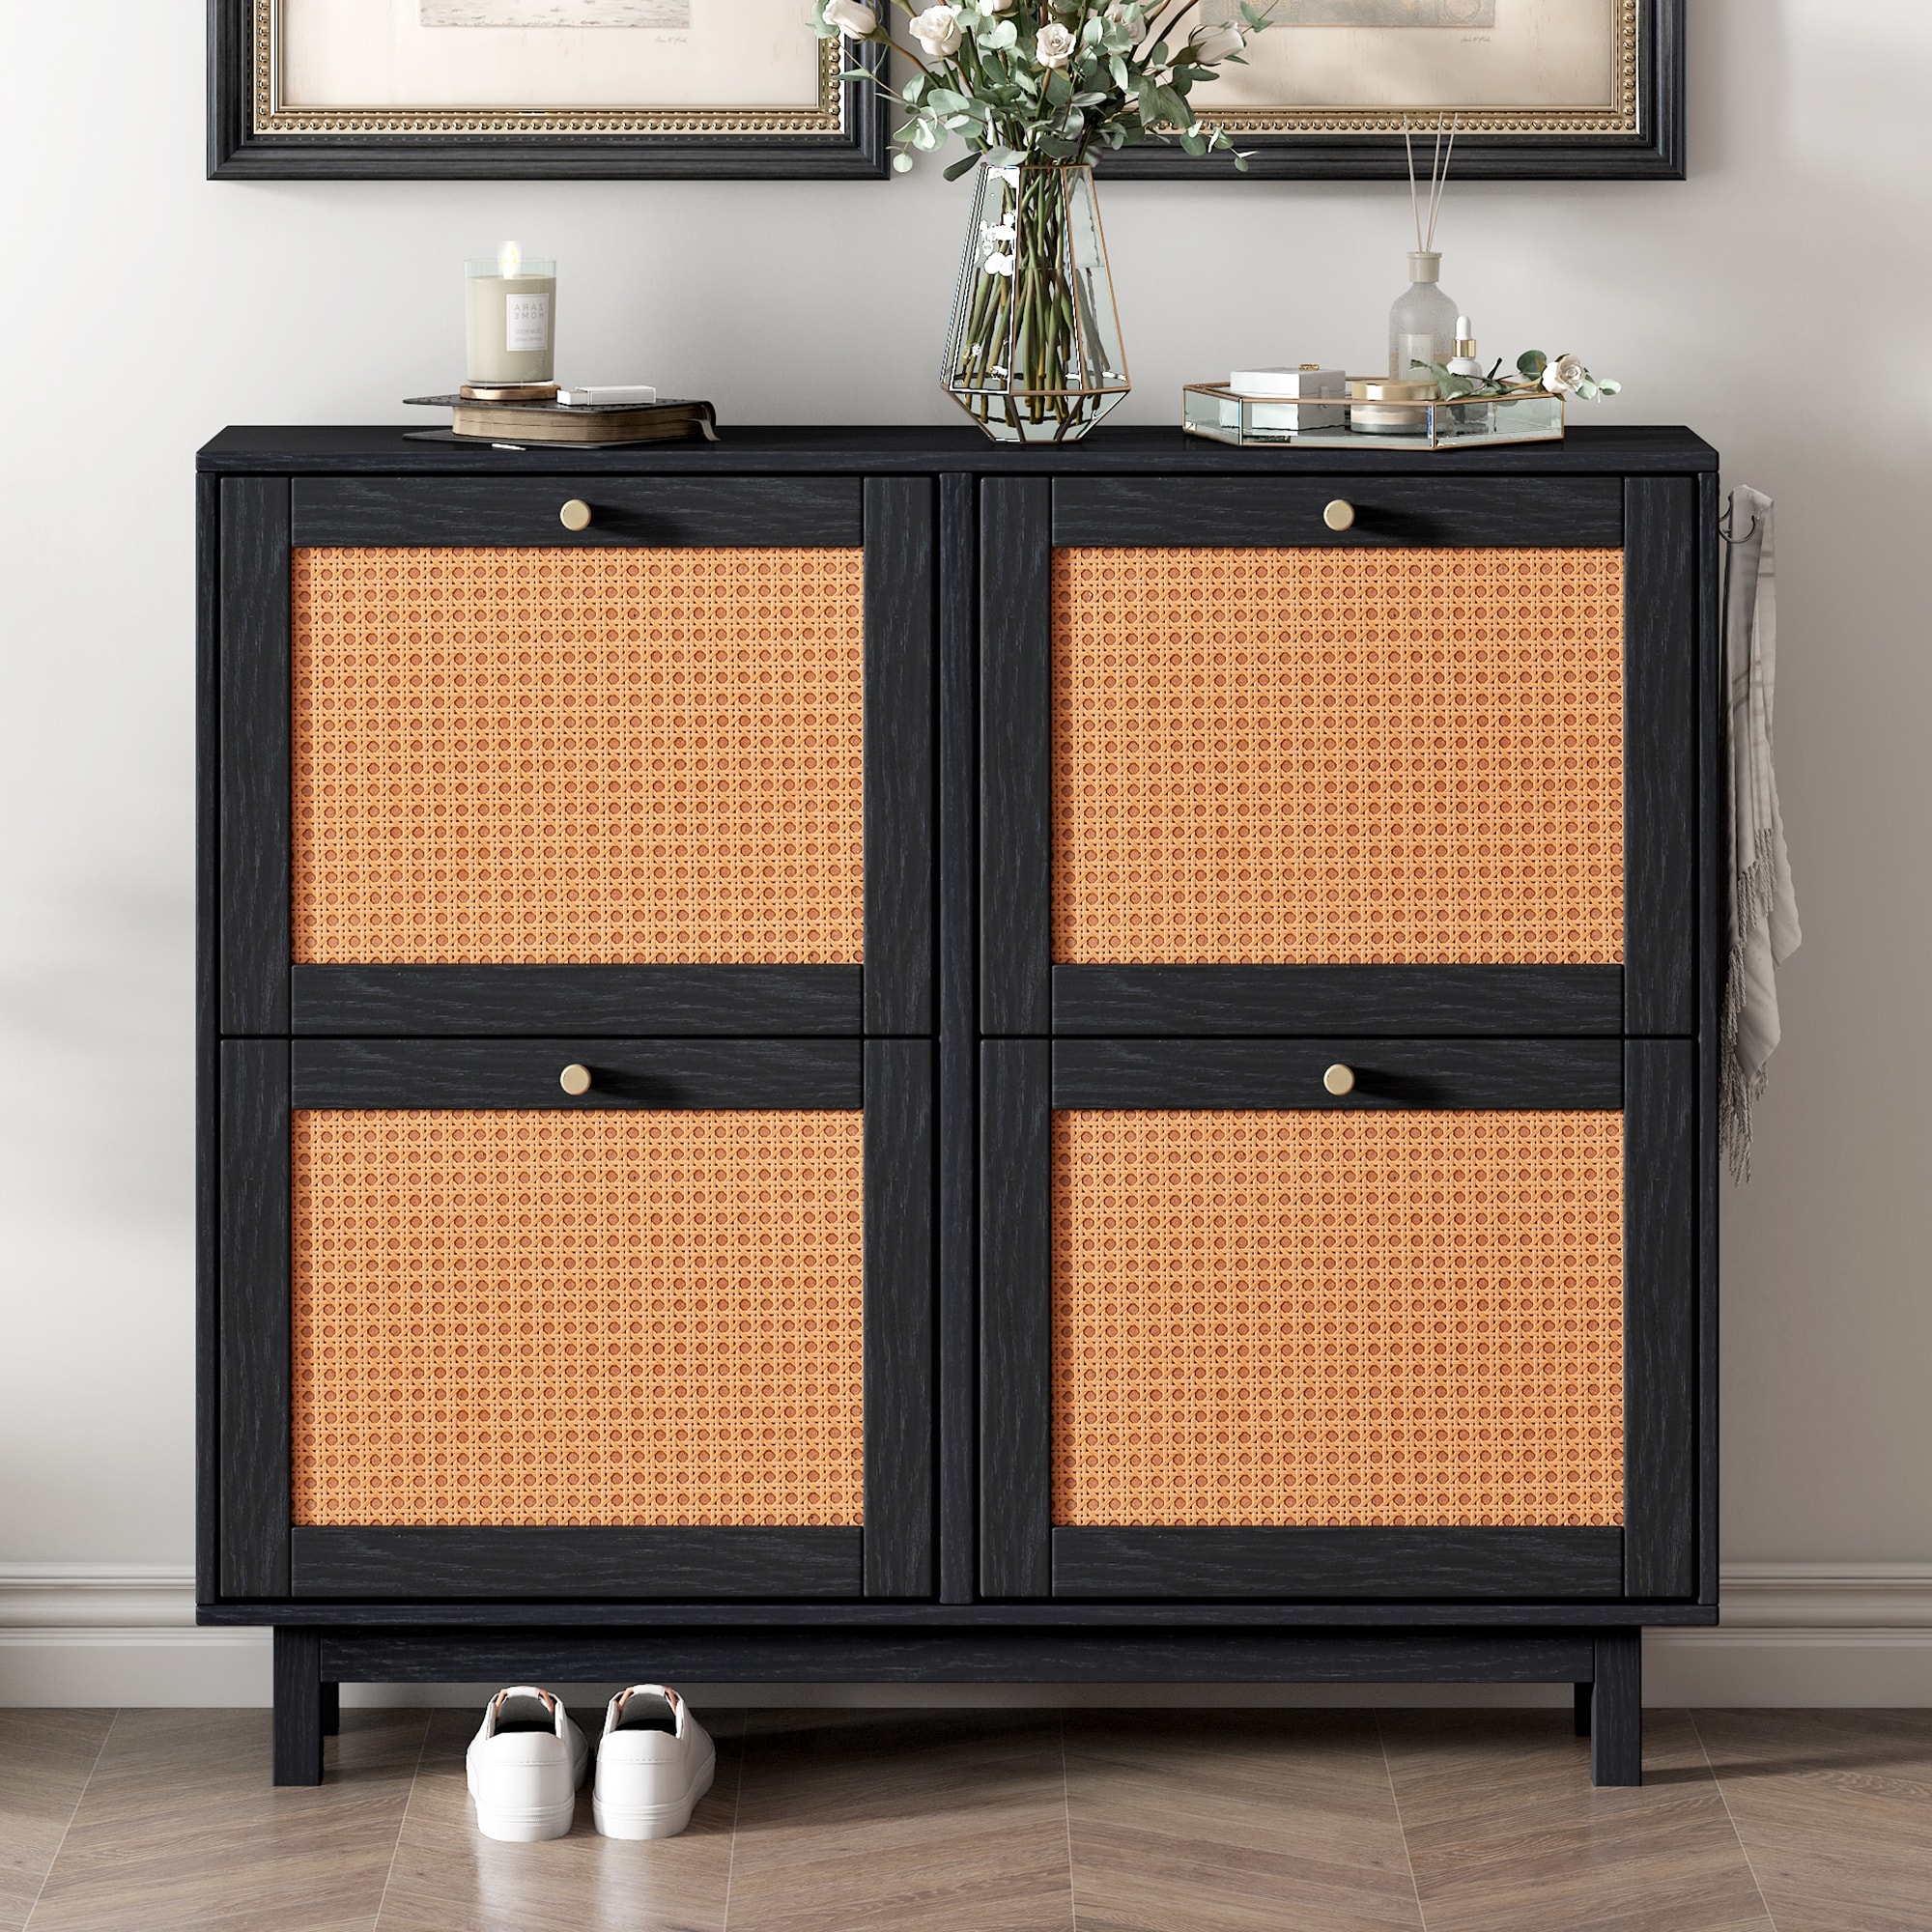 https://ak1.ostkcdn.com/images/products/is/images/direct/68640c823e0709b86418282ad44b3969ee9dcfff/Rattan-Shoe-Cabinet-with-4-Flip-Drawers%2C-2-Tier-Shoe-Storage-Organizer%2C-Free-Standing-Shoe-Rack.jpg